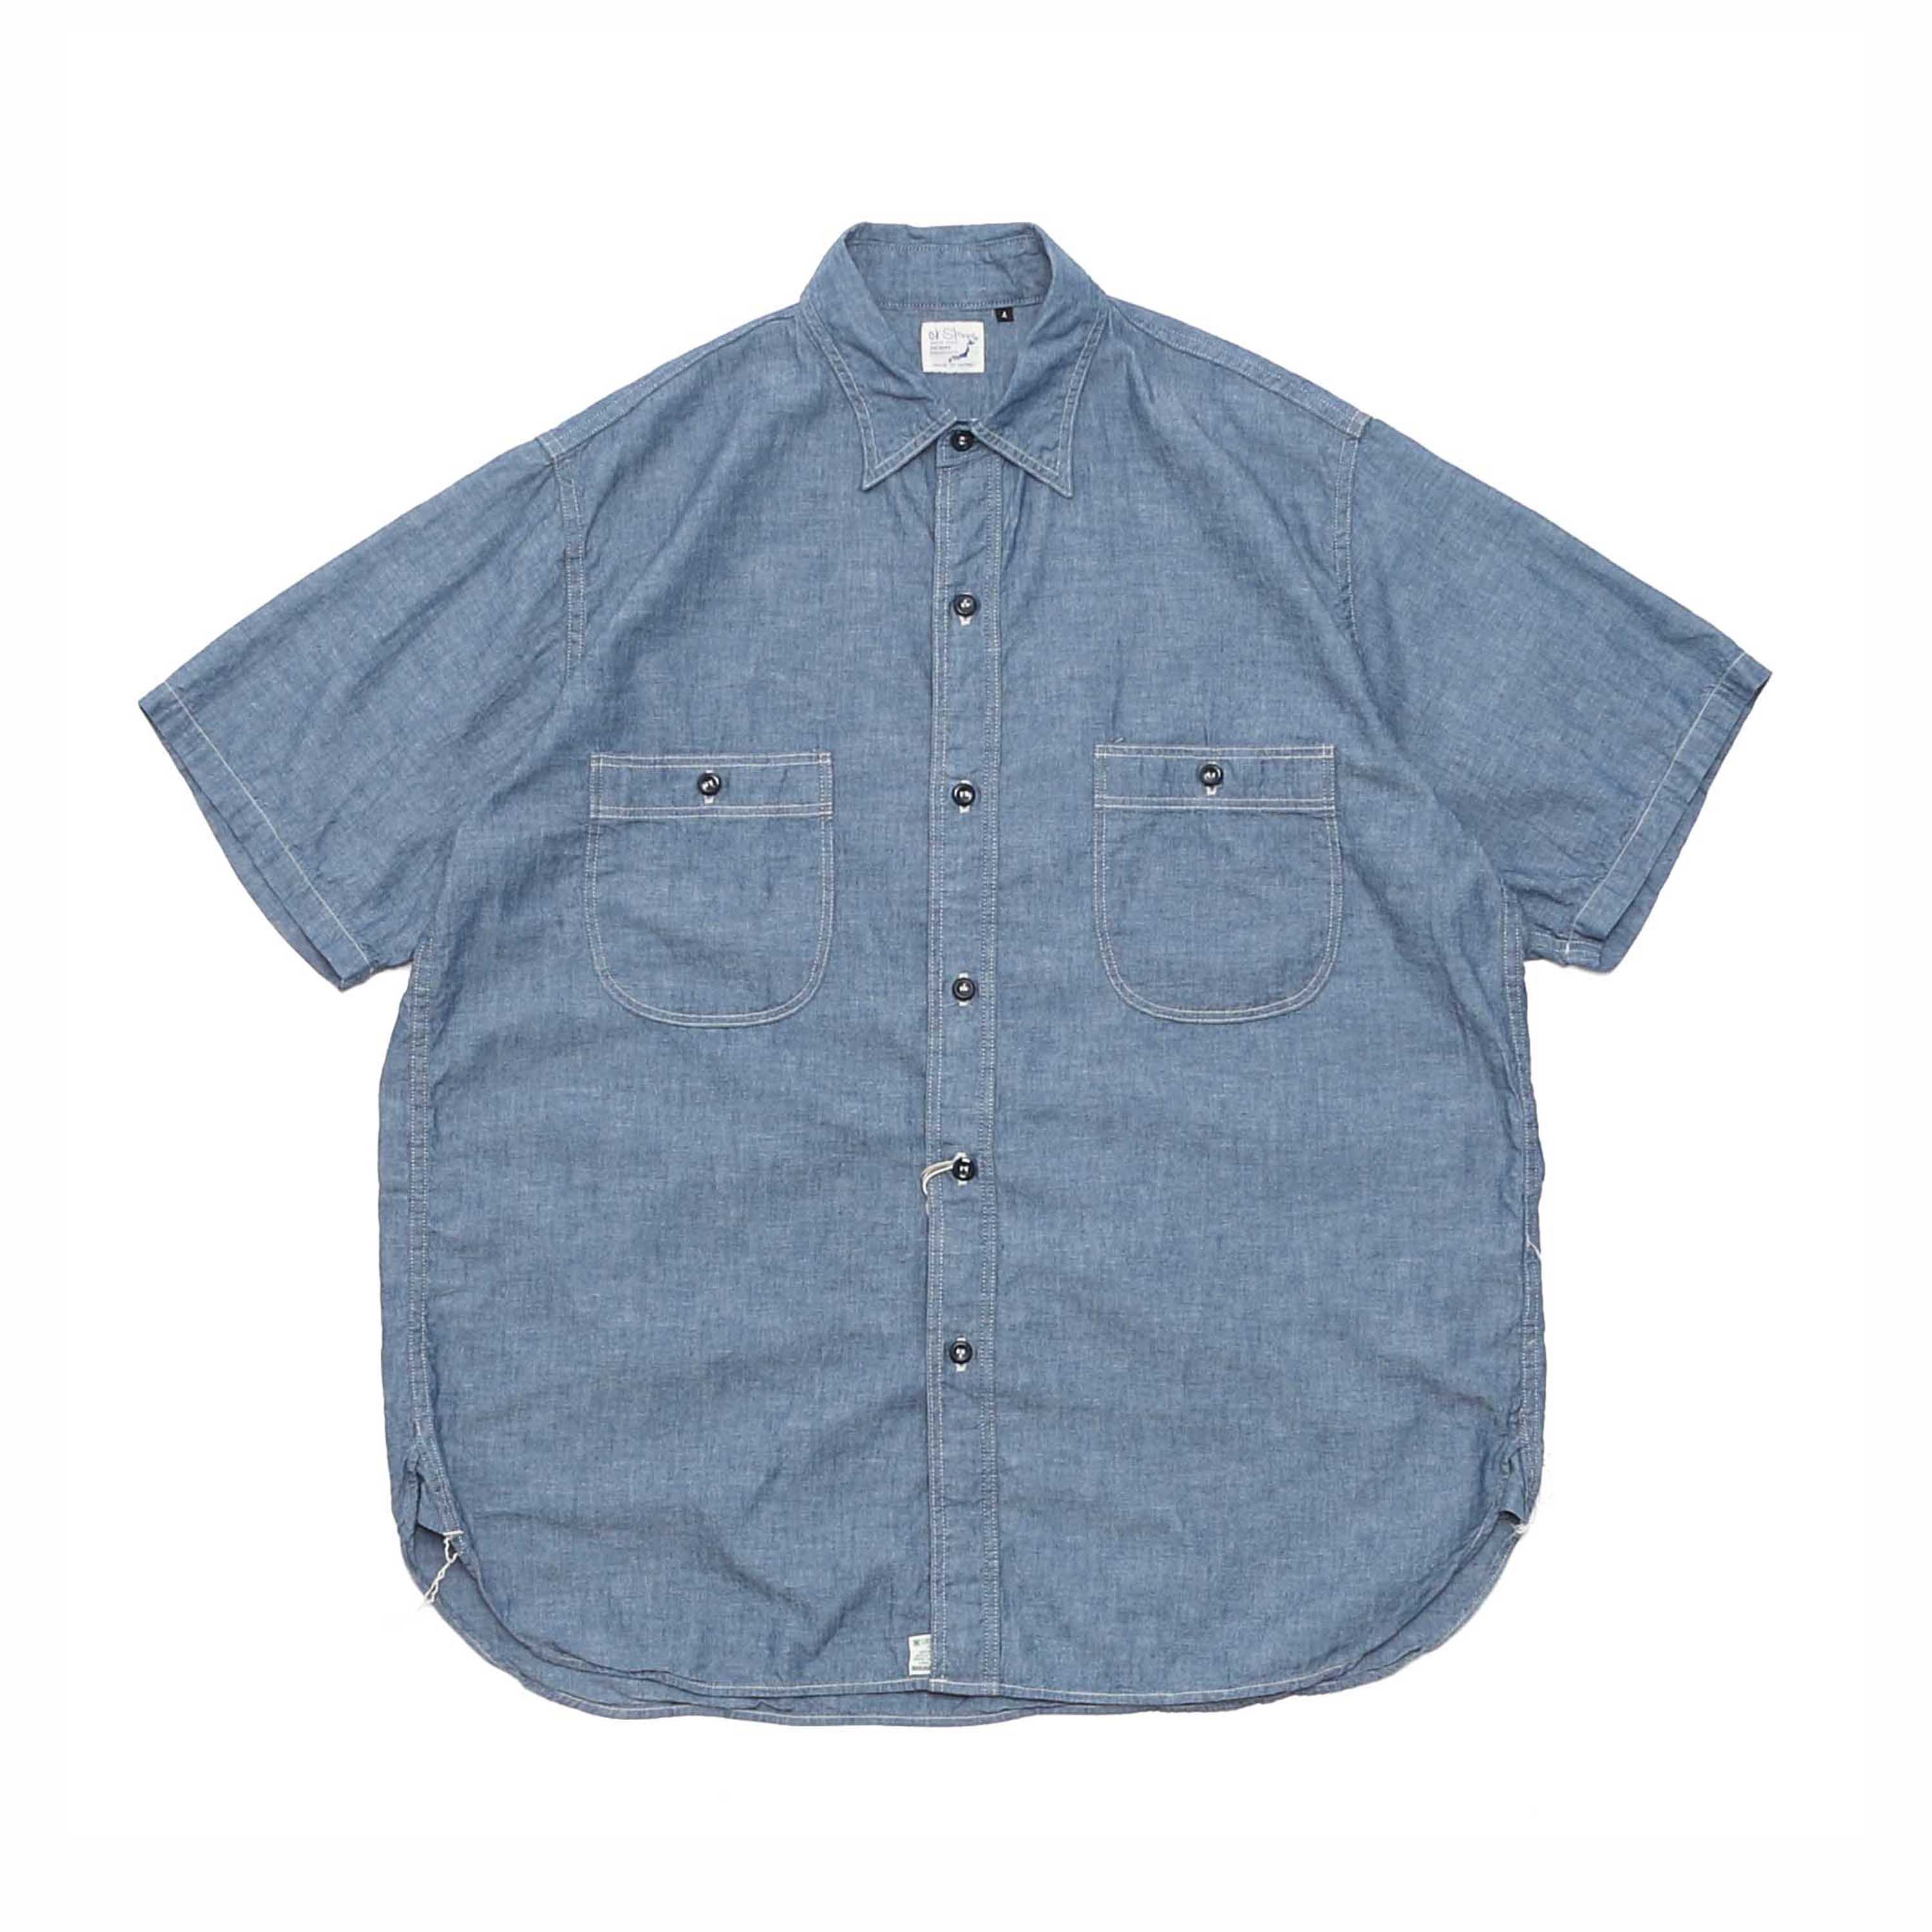 VINTAGE FIT S/S CHAMBRAY WORK SHIRTS - BLUE CHAMBRAY